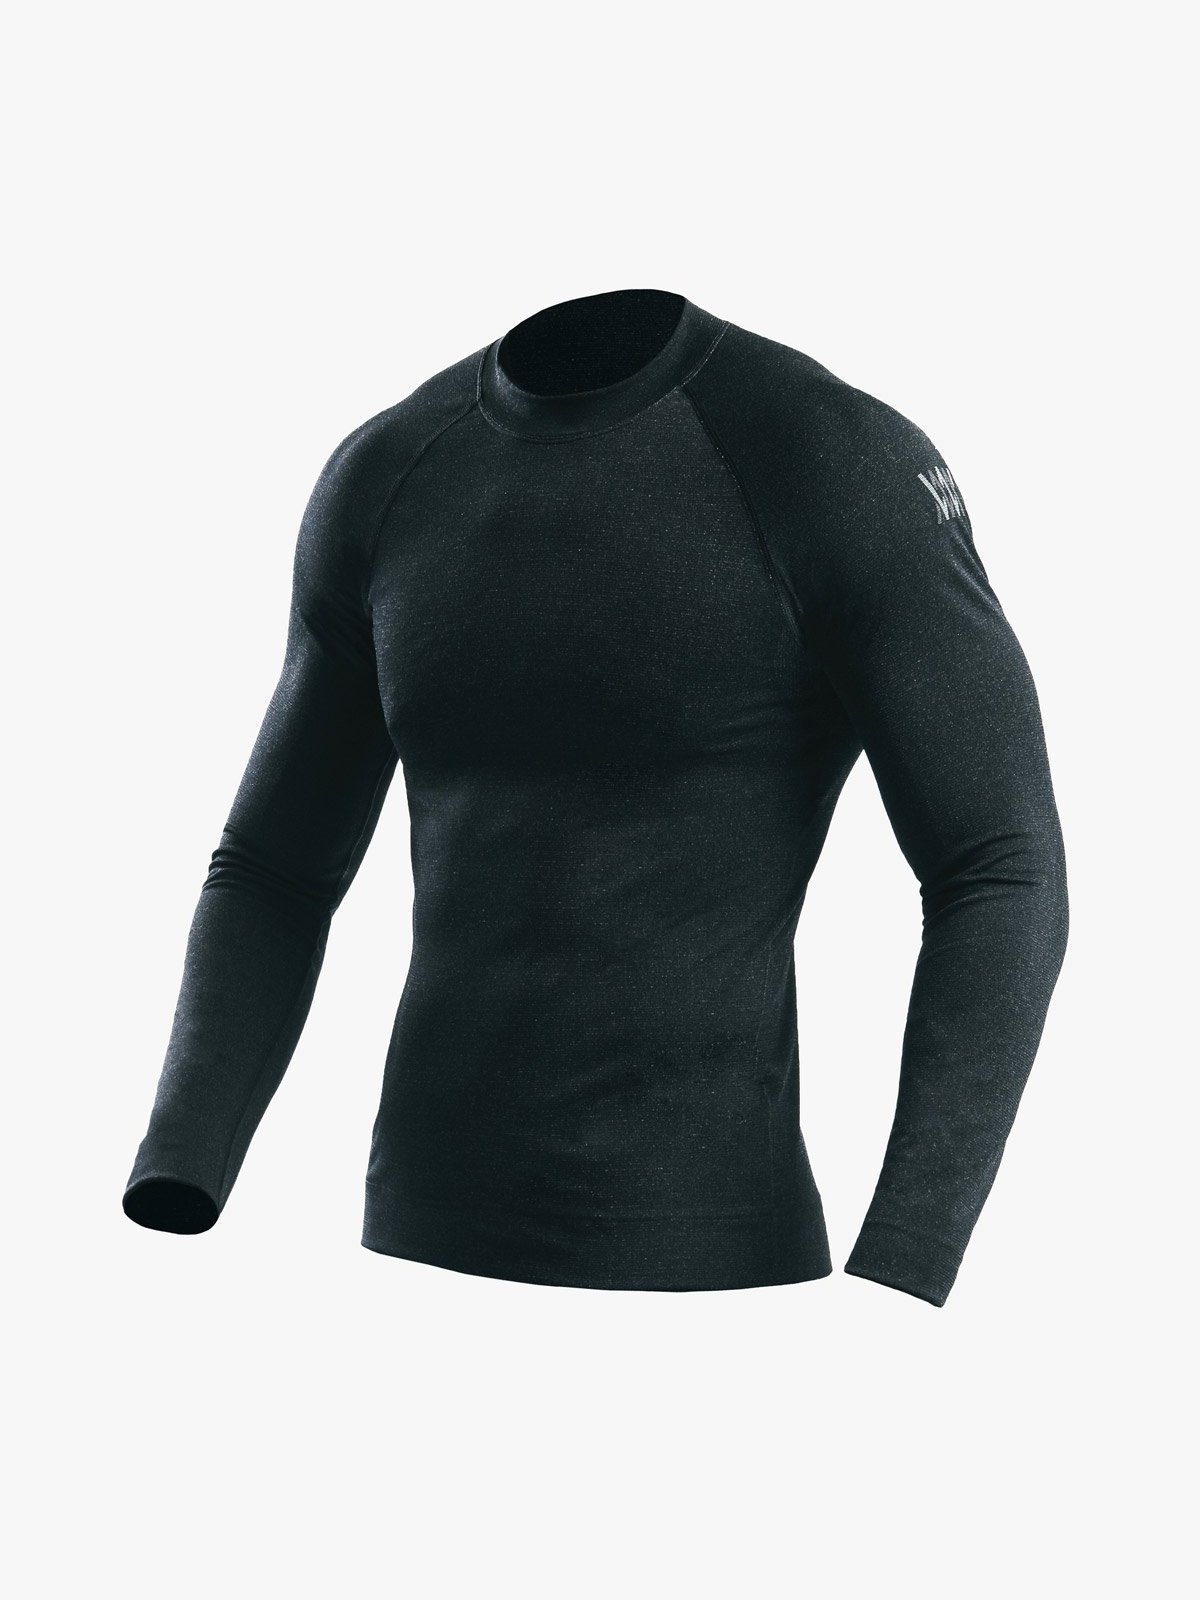 Advanced Projects® : Seamless Base Layers by Mission Workshop - Weatherproof Bags & Technical Apparel - San Francisco & Los Angeles - Built to endure - Guaranteed forever